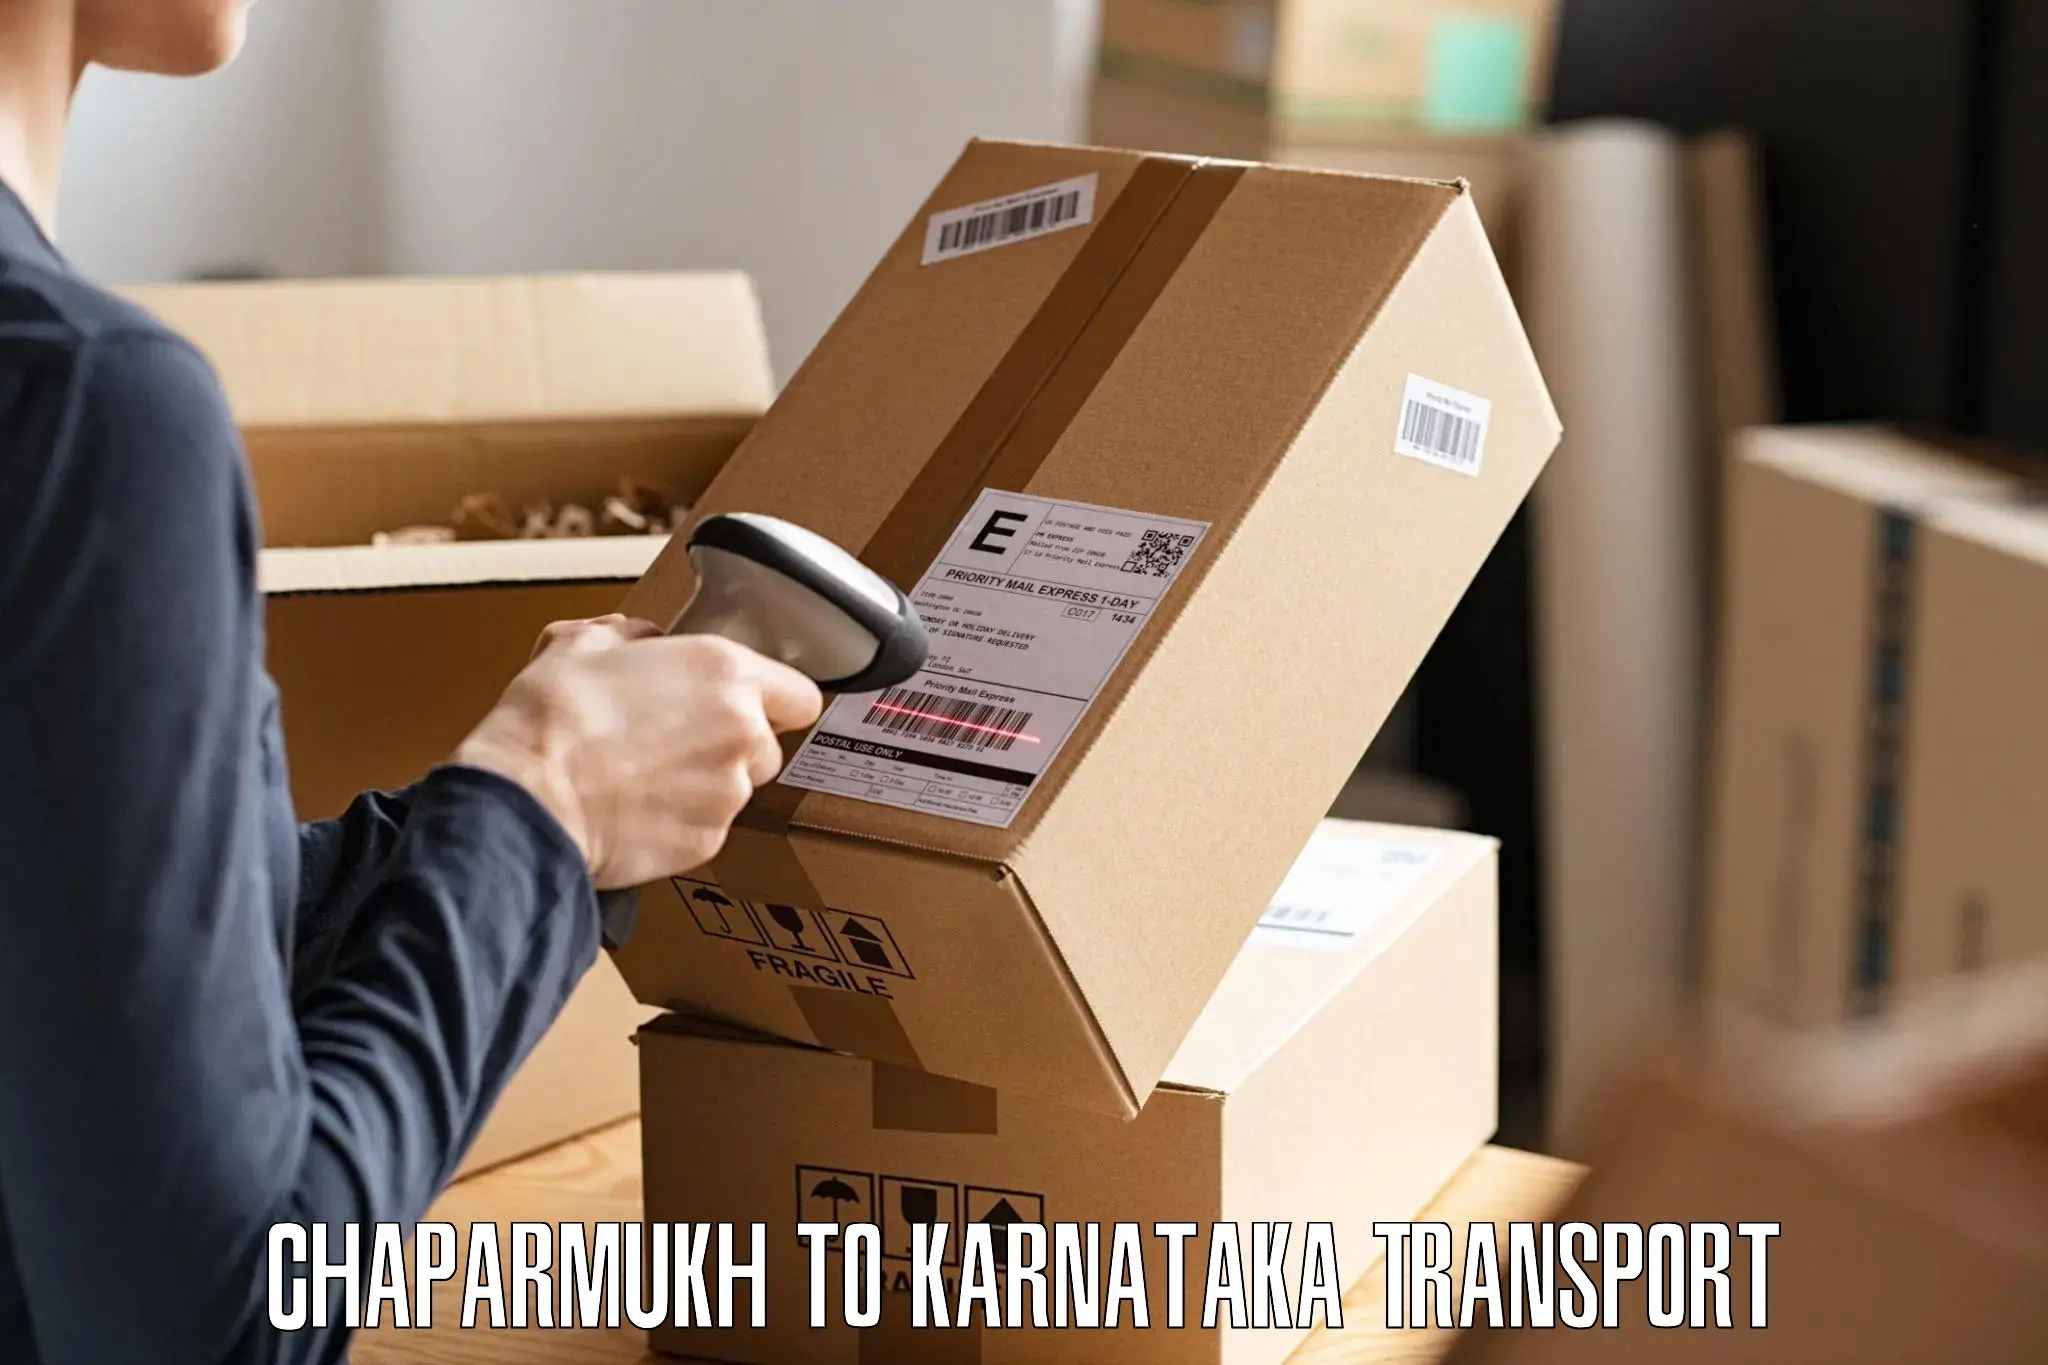 Package delivery services Chaparmukh to Madhugiri